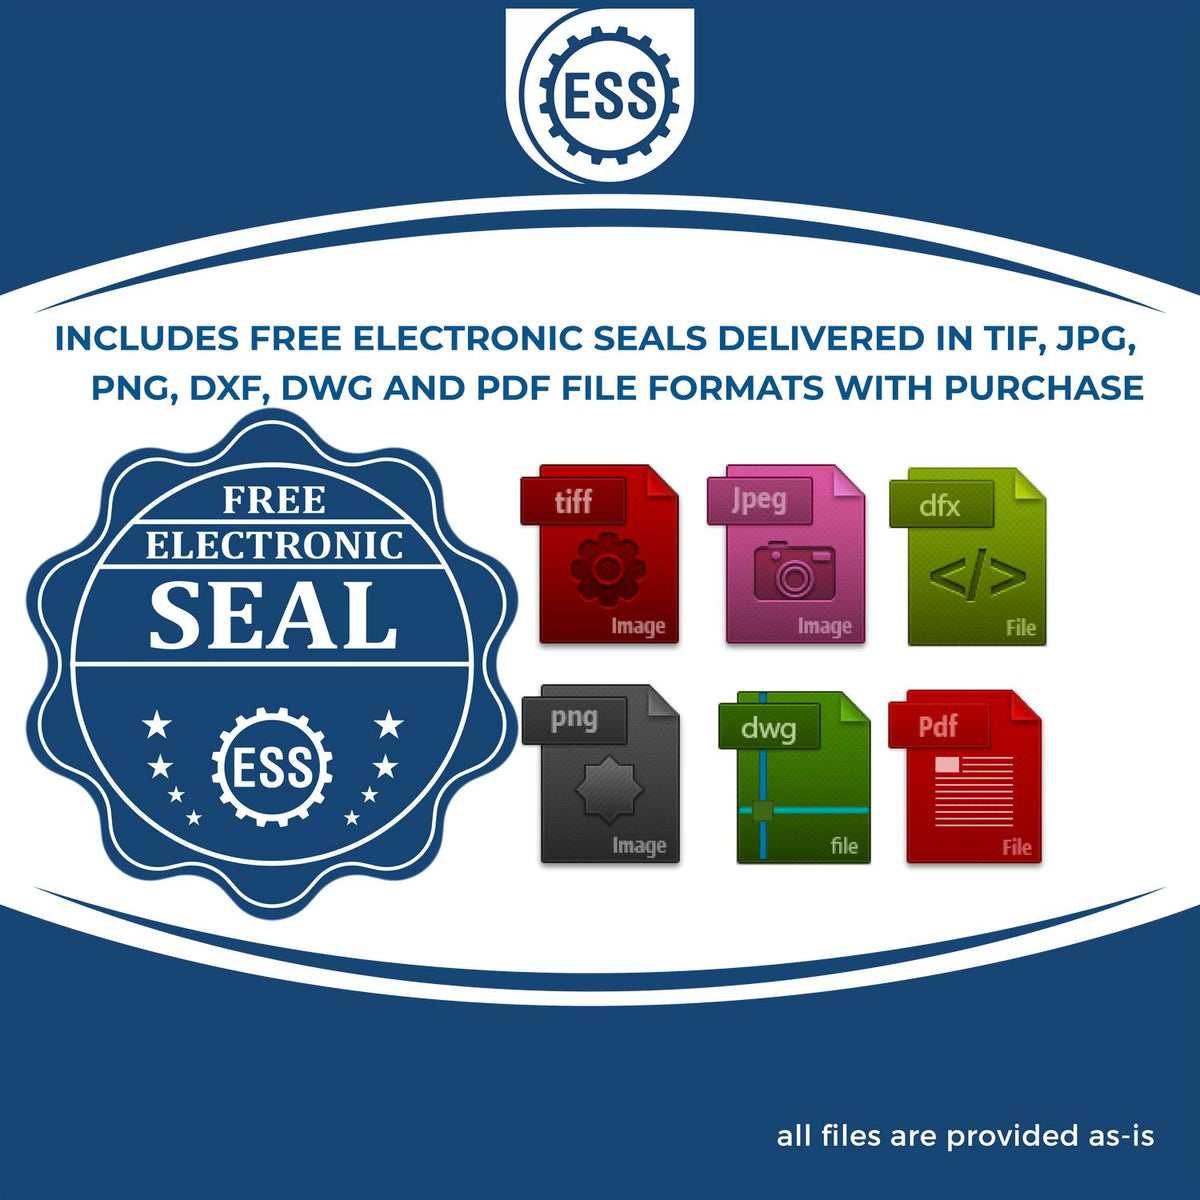 An infographic for the free electronic seal for the Handheld Indiana Land Surveyor Seal illustrating the different file type icons such as DXF, DWG, TIF, JPG and PNG.